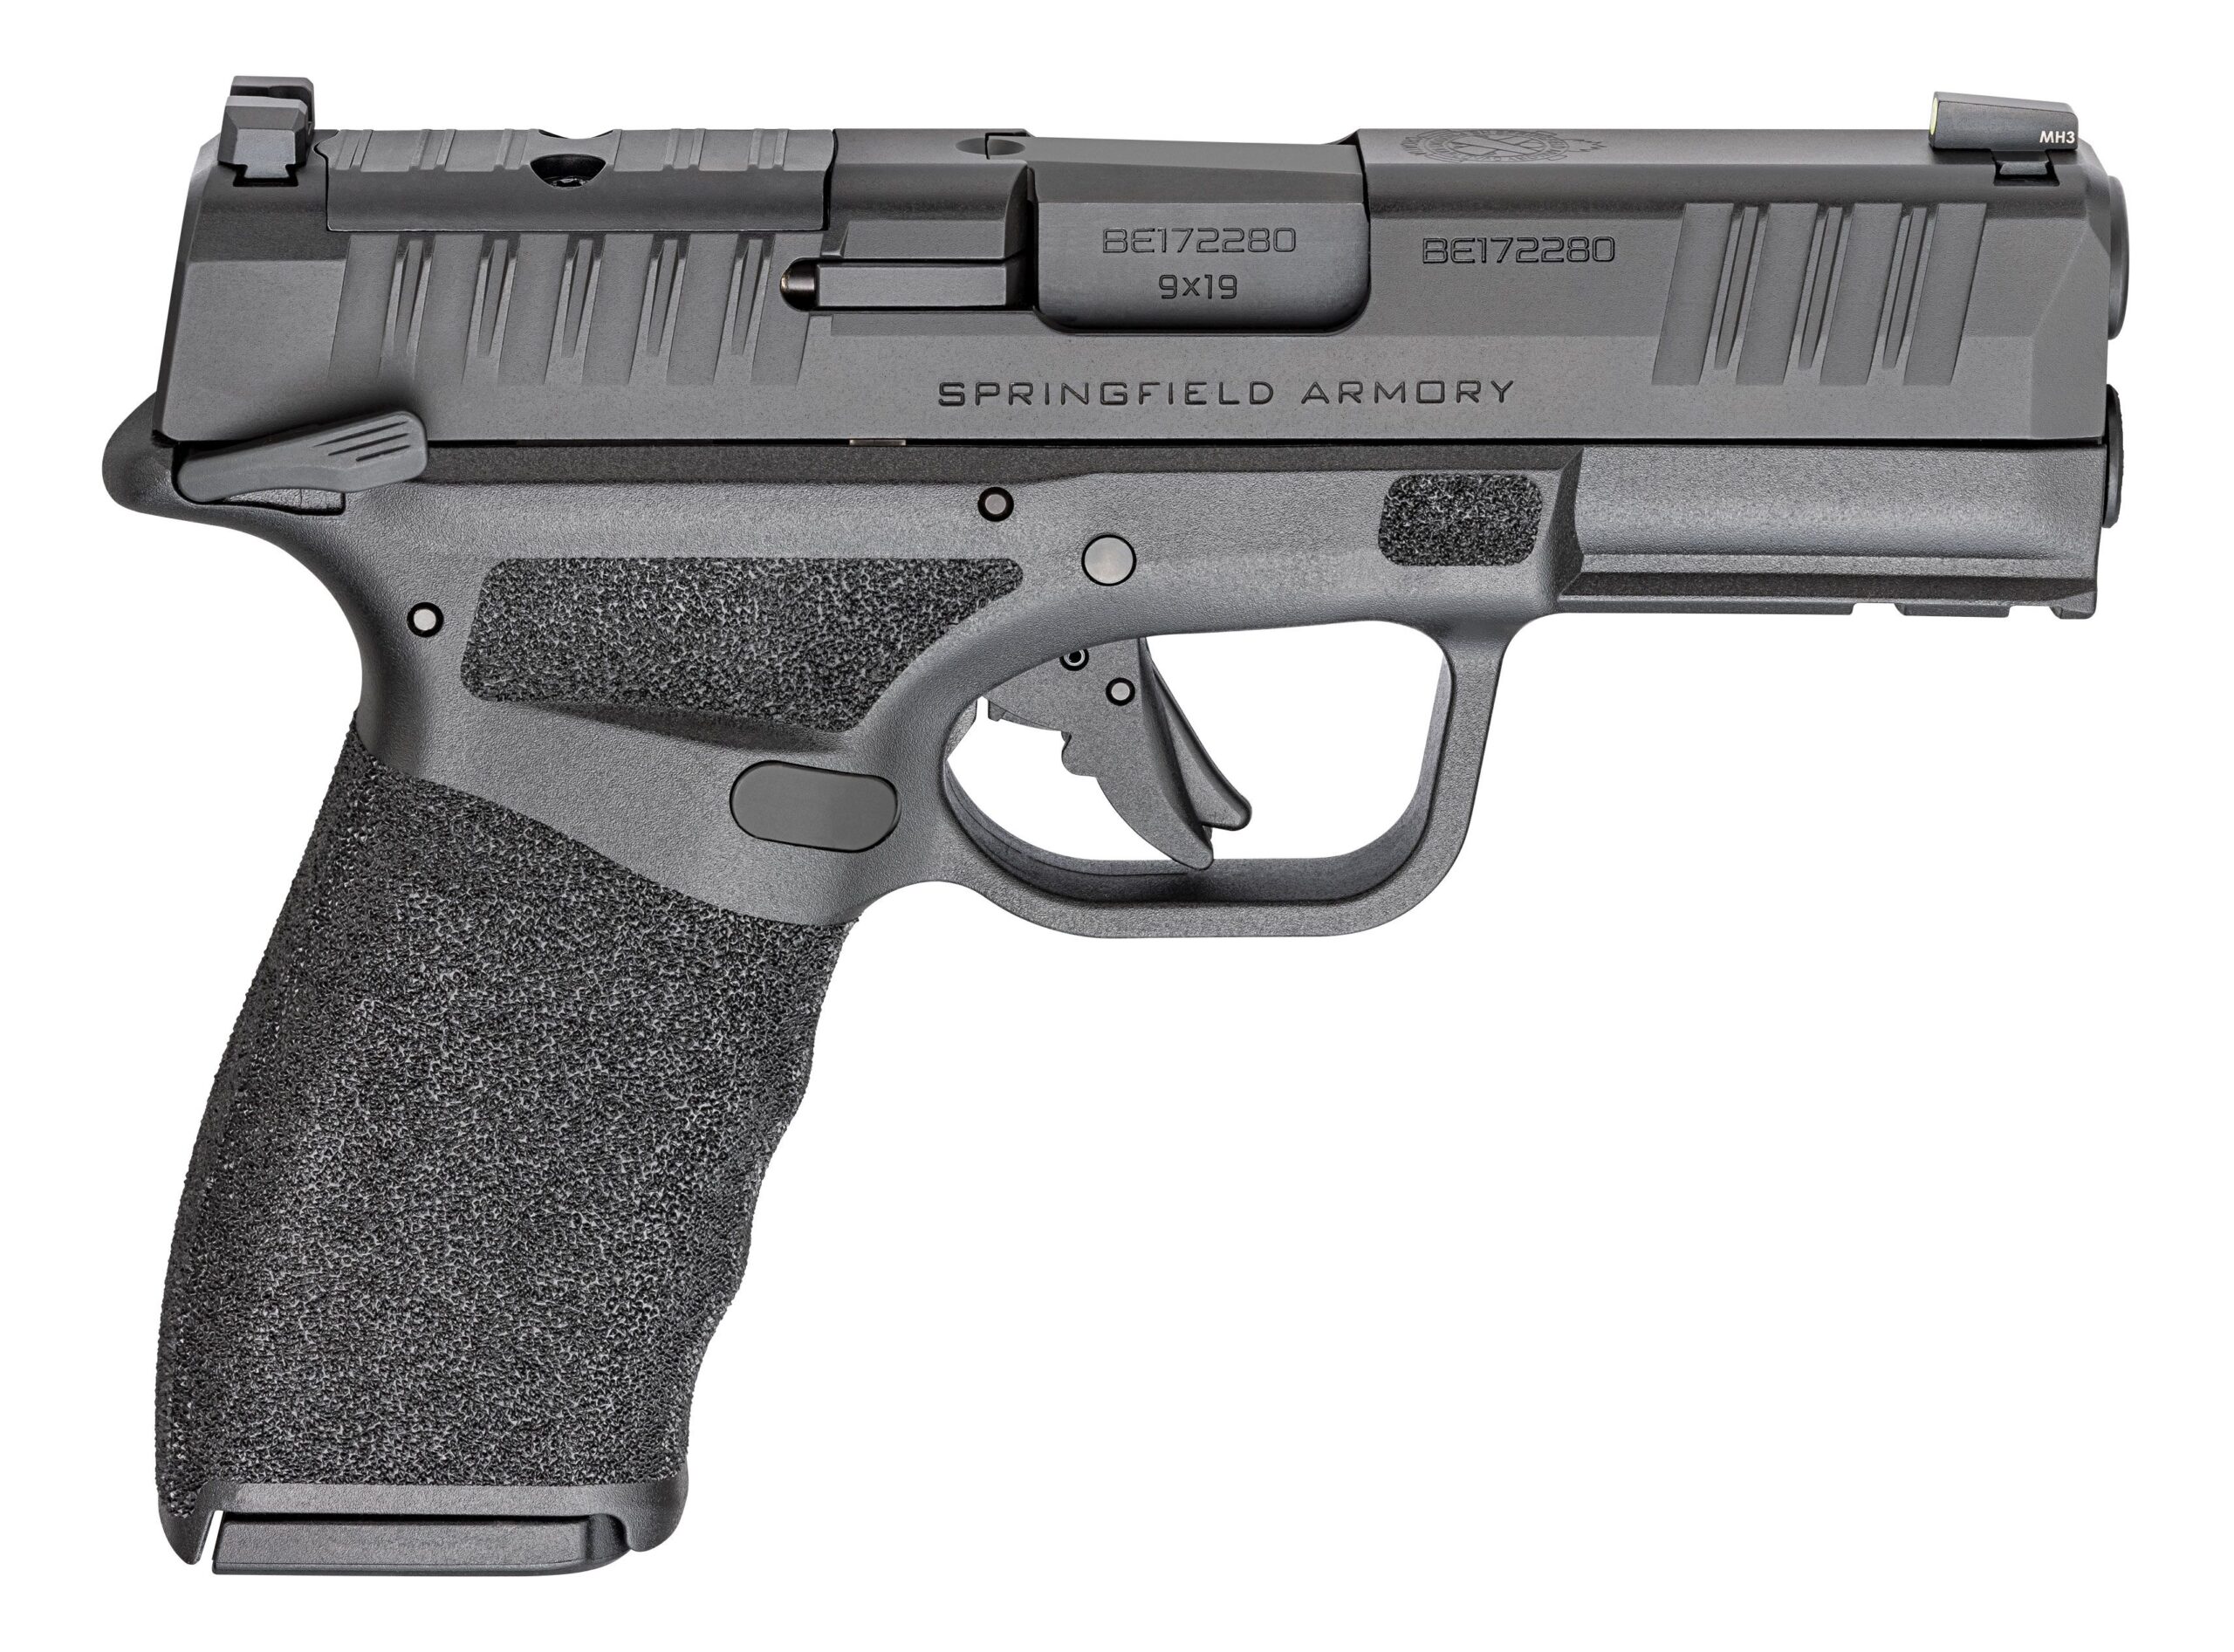 Introducing the New Manual Safety Springfield Hellcat Pro 9mm Pistol